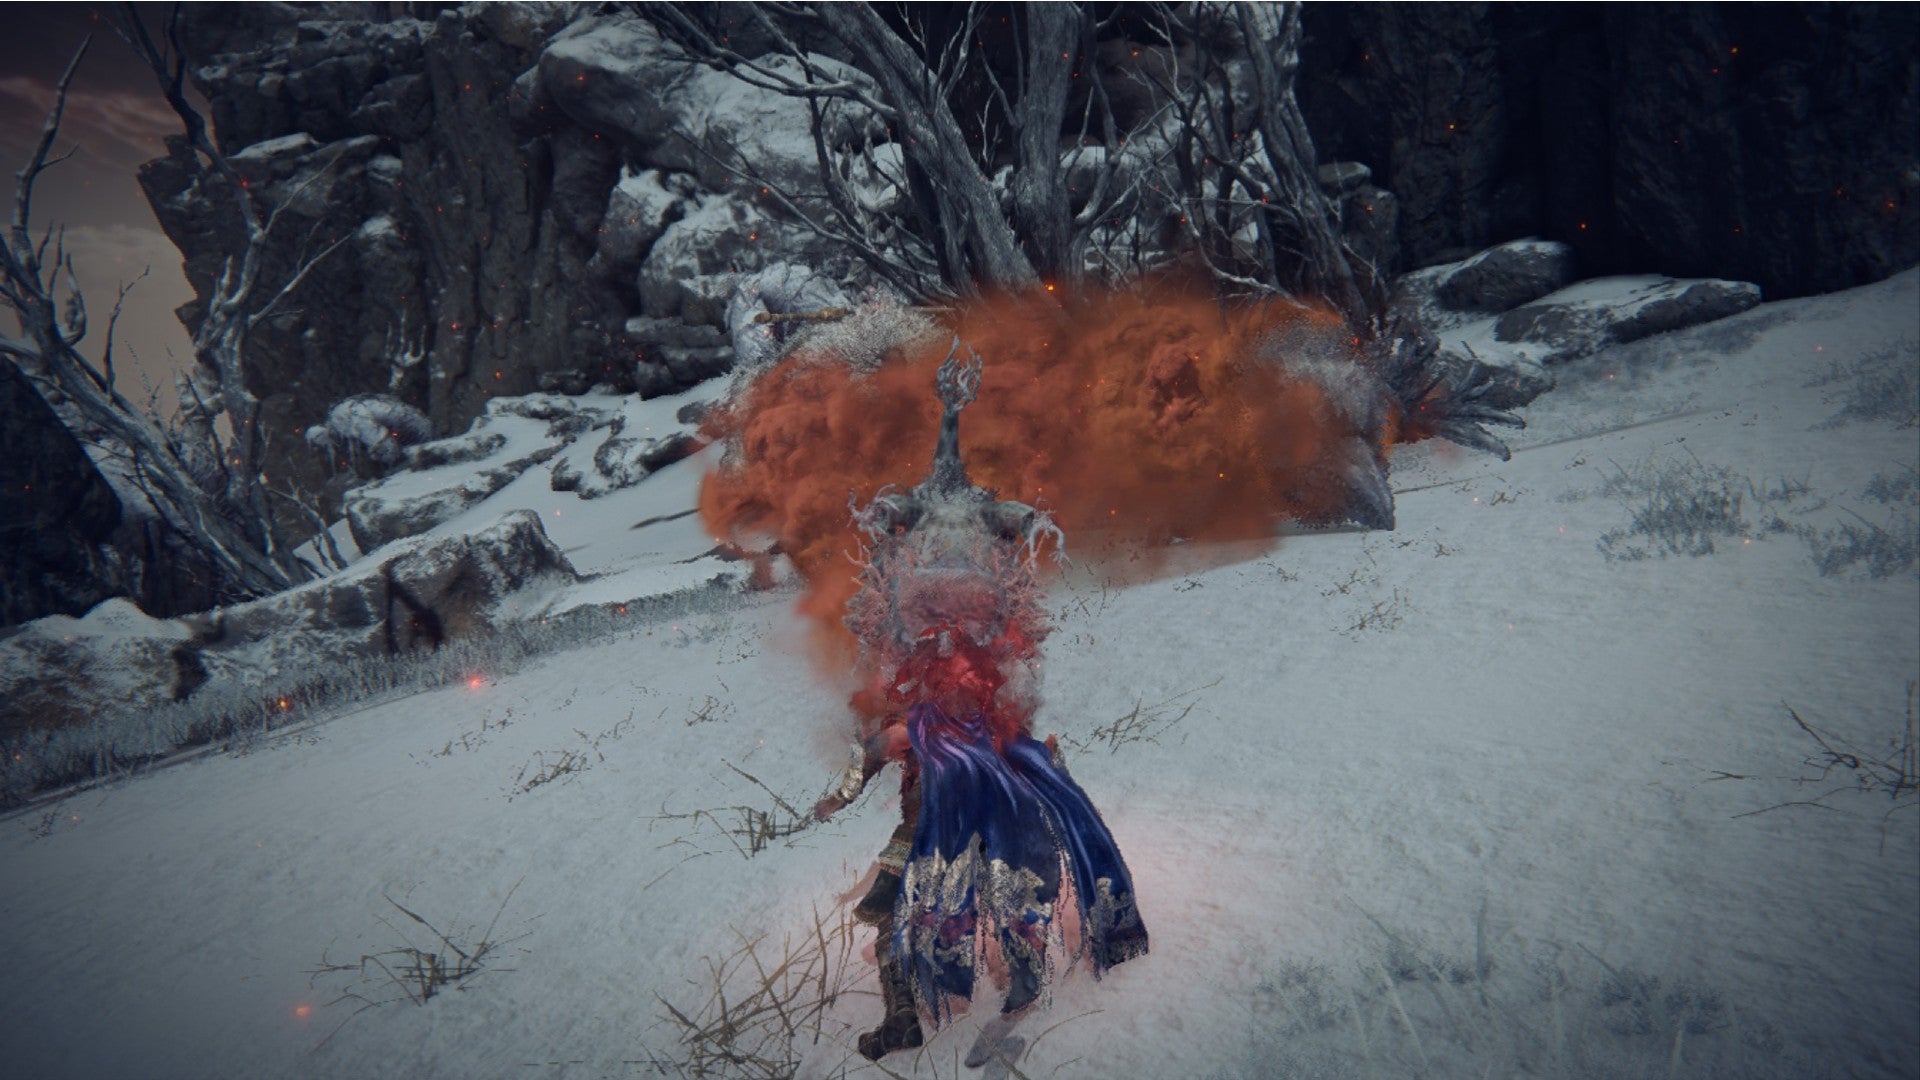 Elden Ring player breathes scarlet rot out of a dragon head on a snow-covered field